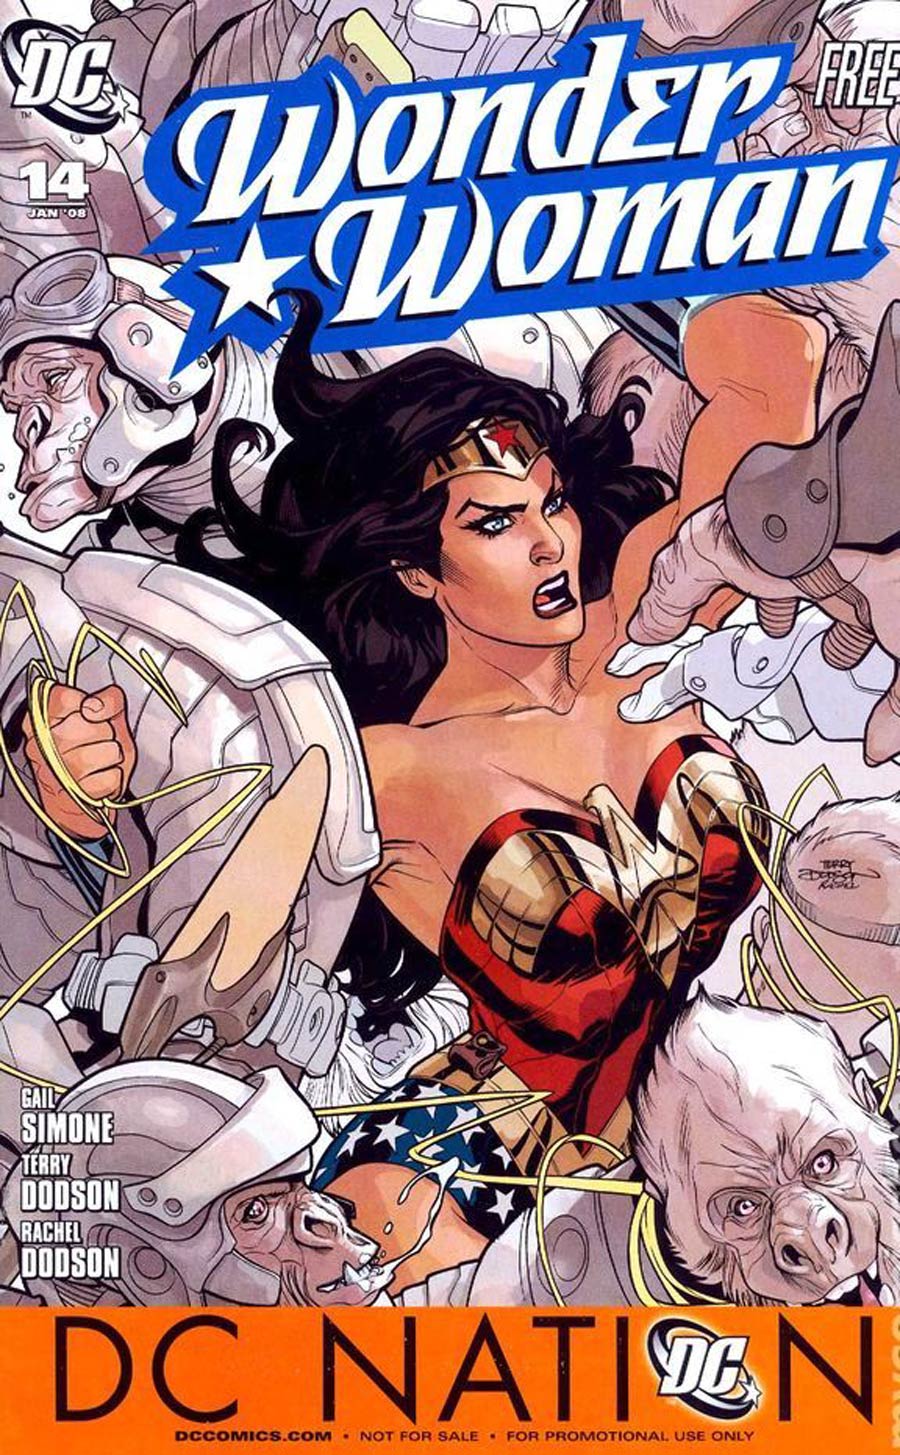 Wonder Woman Vol 3 #14 Cover C DC Nation Convention Giveaway Edition